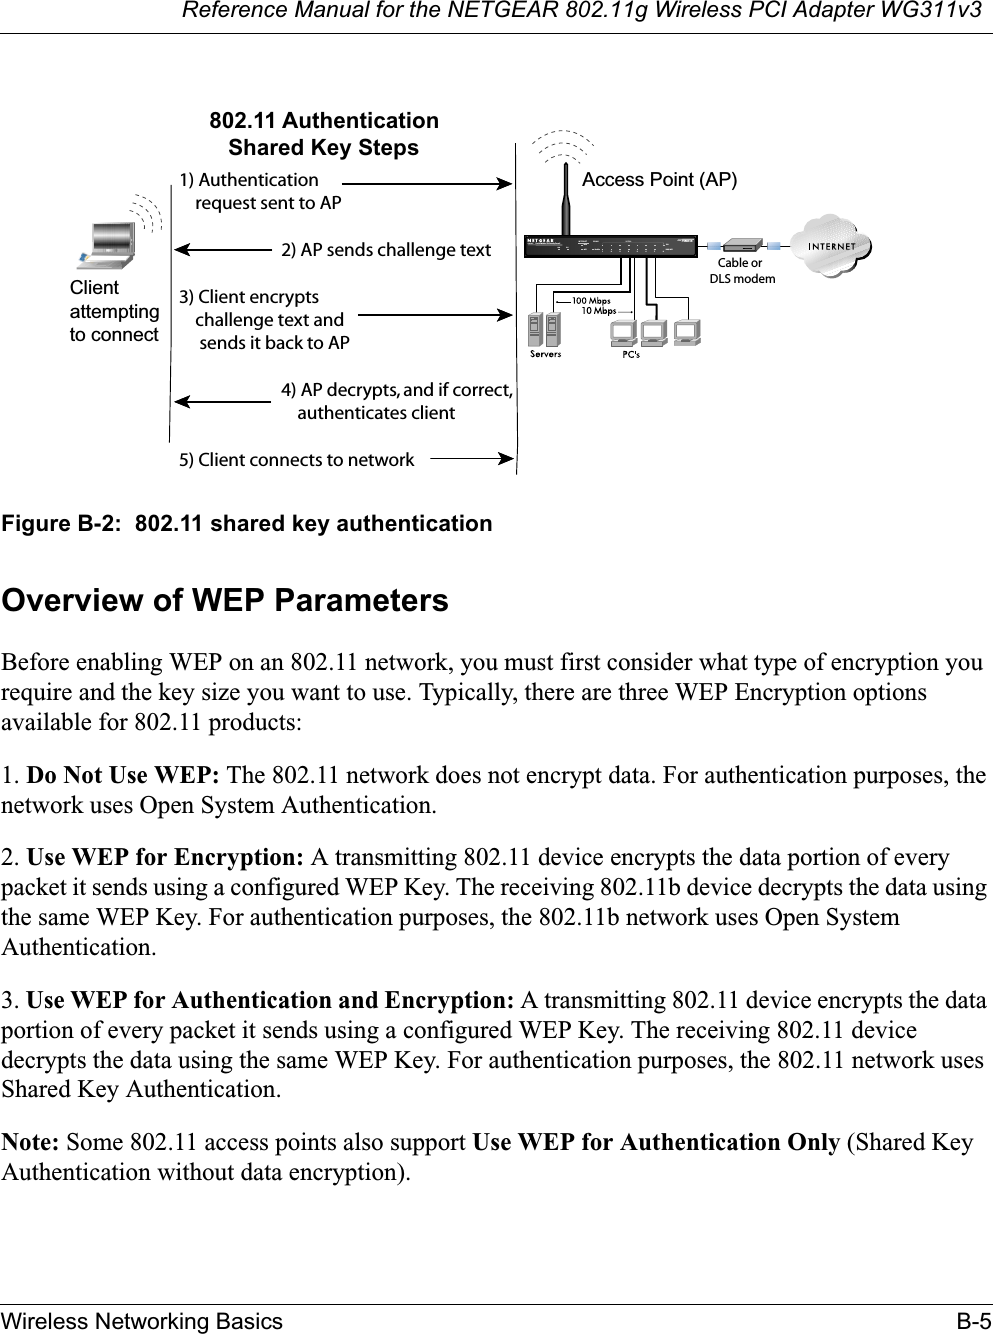 Reference Manual for the NETGEAR 802.11g Wireless PCI Adapter WG311v3Wireless Networking Basics B-5Figure B-2:  802.11 shared key authenticationOverview of WEP ParametersBefore enabling WEP on an 802.11 network, you must first consider what type of encryption you require and the key size you want to use. Typically, there are three WEP Encryption options available for 802.11 products:1. Do Not Use WEP: The 802.11 network does not encrypt data. For authentication purposes, the network uses Open System Authentication.2. Use WEP for Encryption: A transmitting 802.11 device encrypts the data portion of every packet it sends using a configured WEP Key. The receiving 802.11b device decrypts the data using the same WEP Key. For authentication purposes, the 802.11b network uses Open System Authentication.3. Use WEP for Authentication and Encryption: A transmitting 802.11 device encrypts the data portion of every packet it sends using a configured WEP Key. The receiving 802.11 device decrypts the data using the same WEP Key. For authentication purposes, the 802.11 network uses Shared Key Authentication.Note: Some 802.11 access points also support Use WEP for Authentication Only (Shared Key Authentication without data encryption). INTERNET LOCALACT12345678LNKLNK/ACT100Cable/DSL ProSafeWirelessVPN Security FirewallMODEL FVM318PWR TESTWLANEnableAccess Point (AP)1) Authenticationrequest sent to AP2) AP sends challenge text3) Client encryptschallenge text andsends it back to AP4) AP decrypts, and if correct,authenticates client5) Client connects to network802.11 AuthenticationShared Key StepsCable orDLS modemClientattemptingto connect